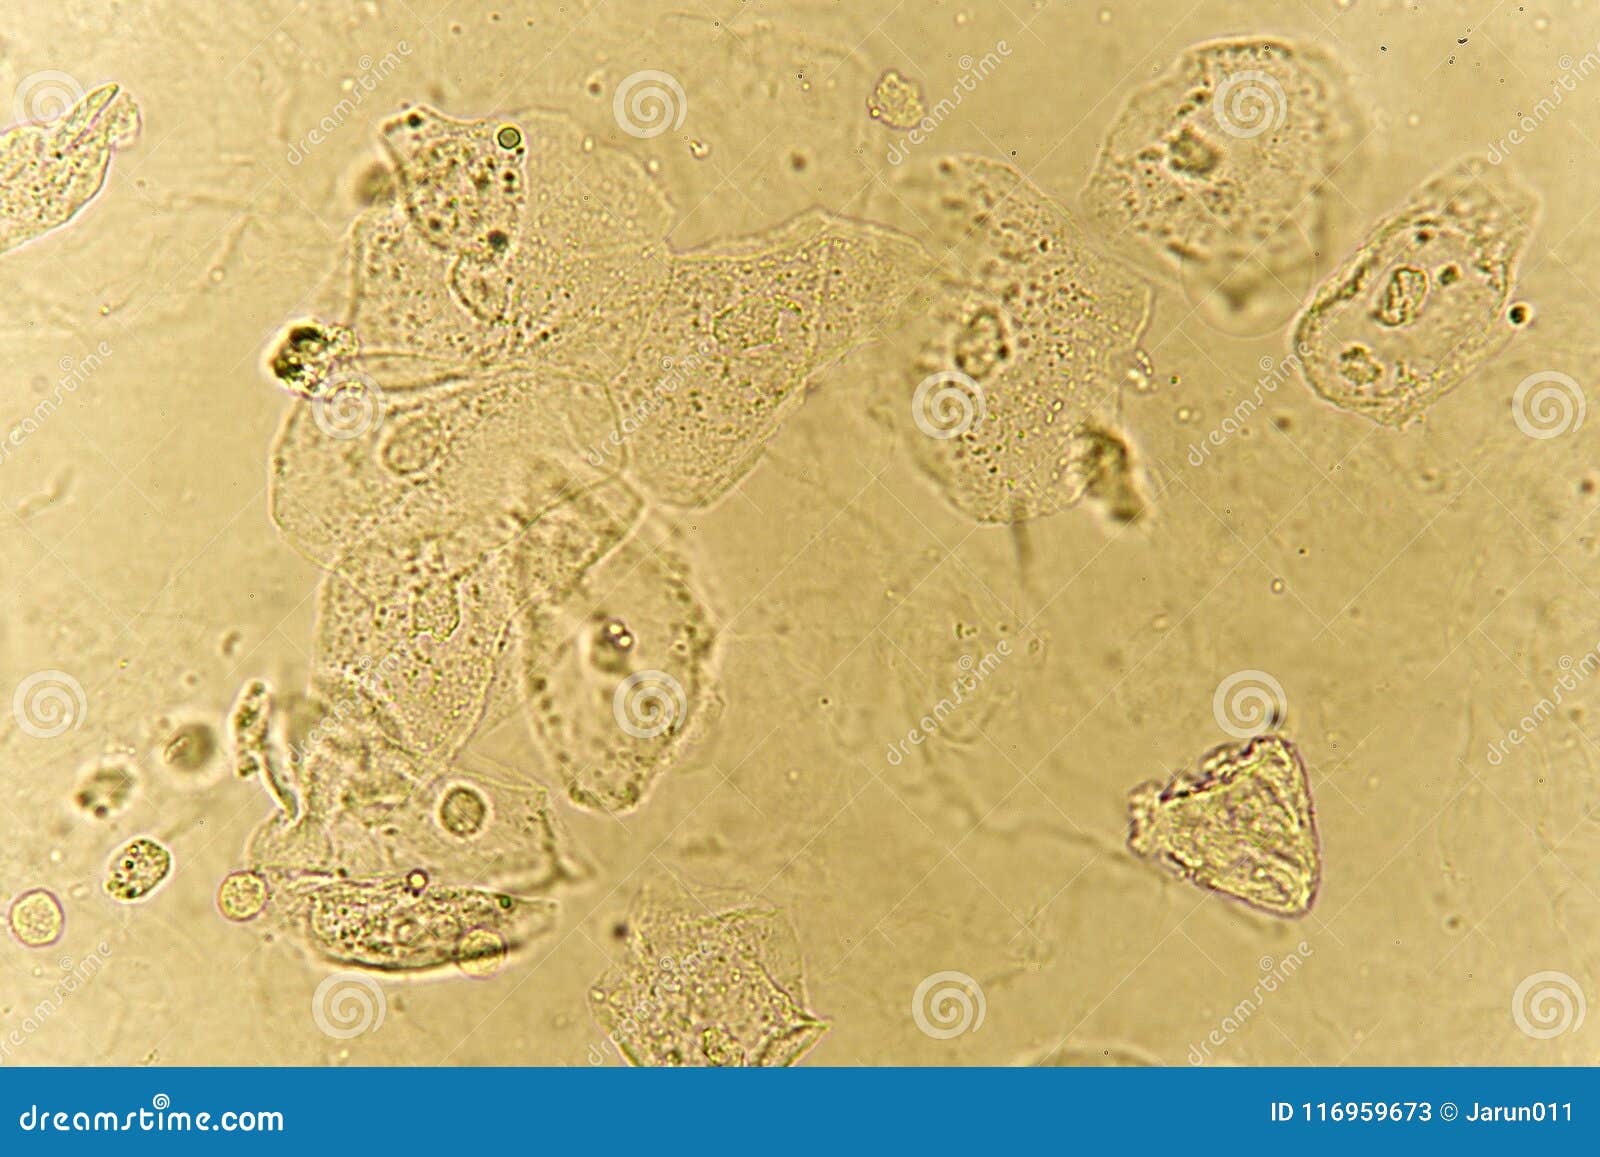 Epithelial Cells In Urine Under Microscope - Micropedia